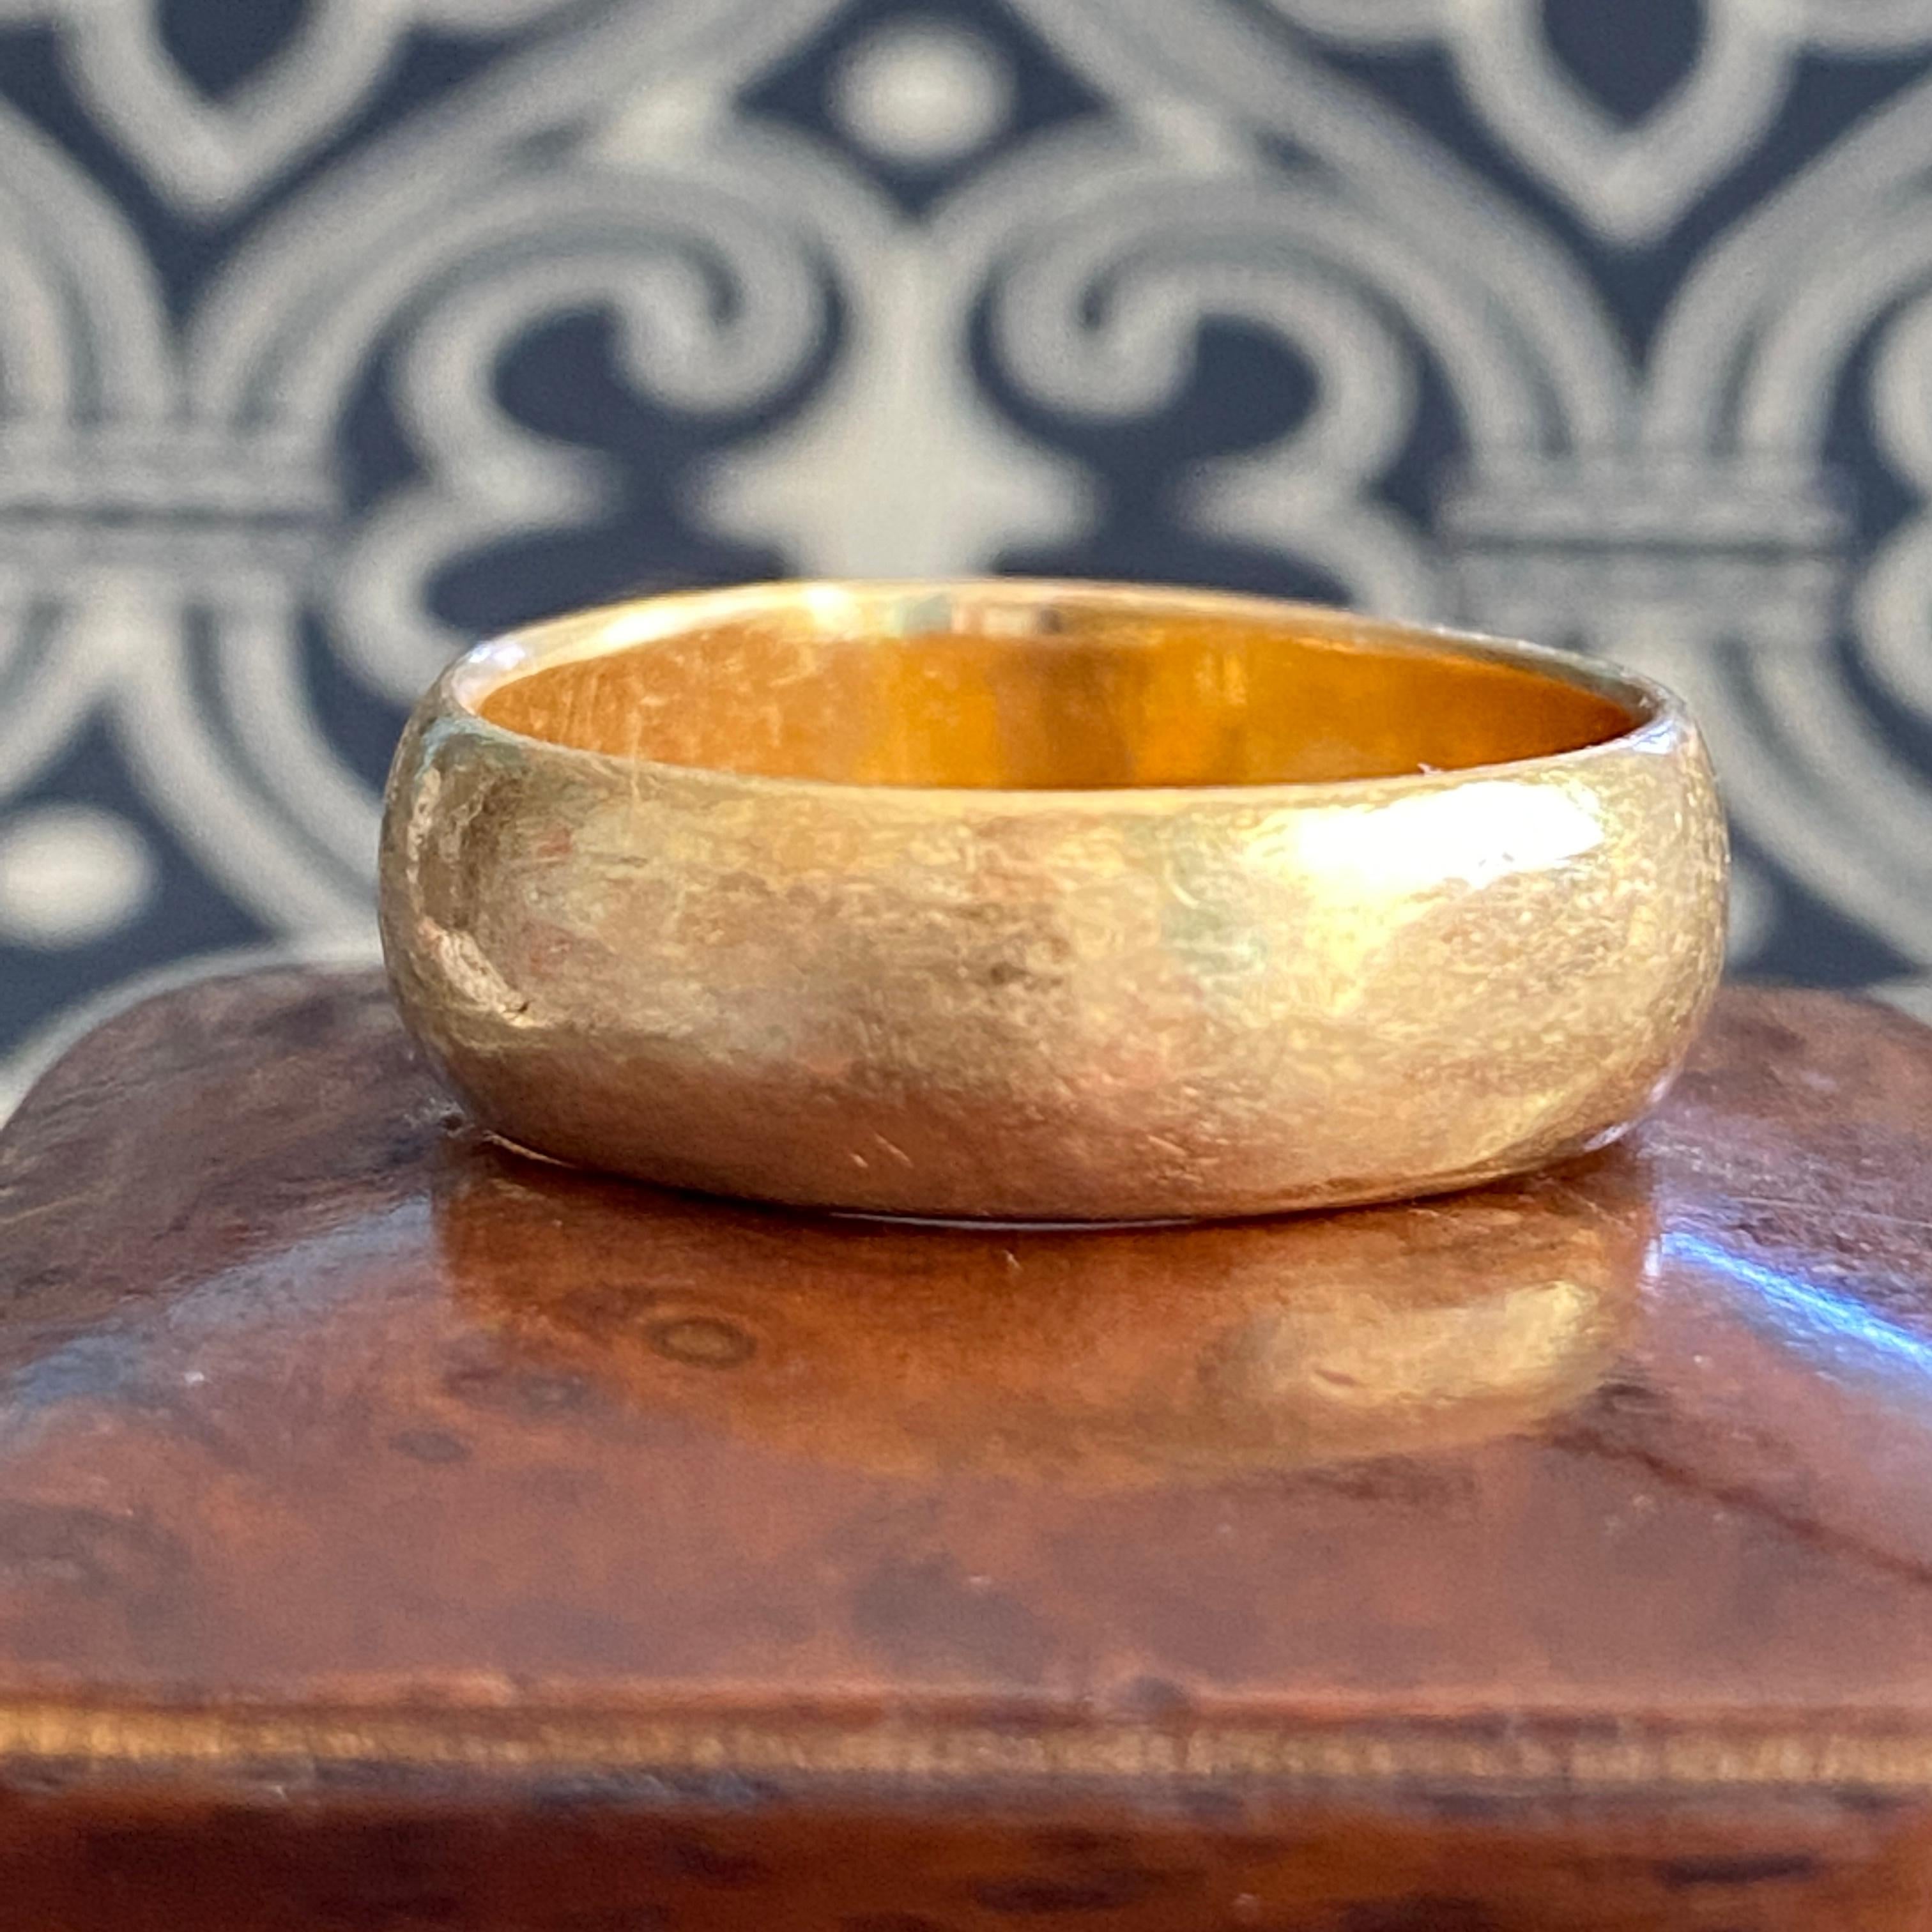 Details:
Gorgeous chunky wide vintage wedding band in buttery 22K yellow gold! It is so lovely, and soft. It has a rounded fit, and is very comfortable on your hand. This band would pair nicely with a diamond band or another 22K ring! The ring has